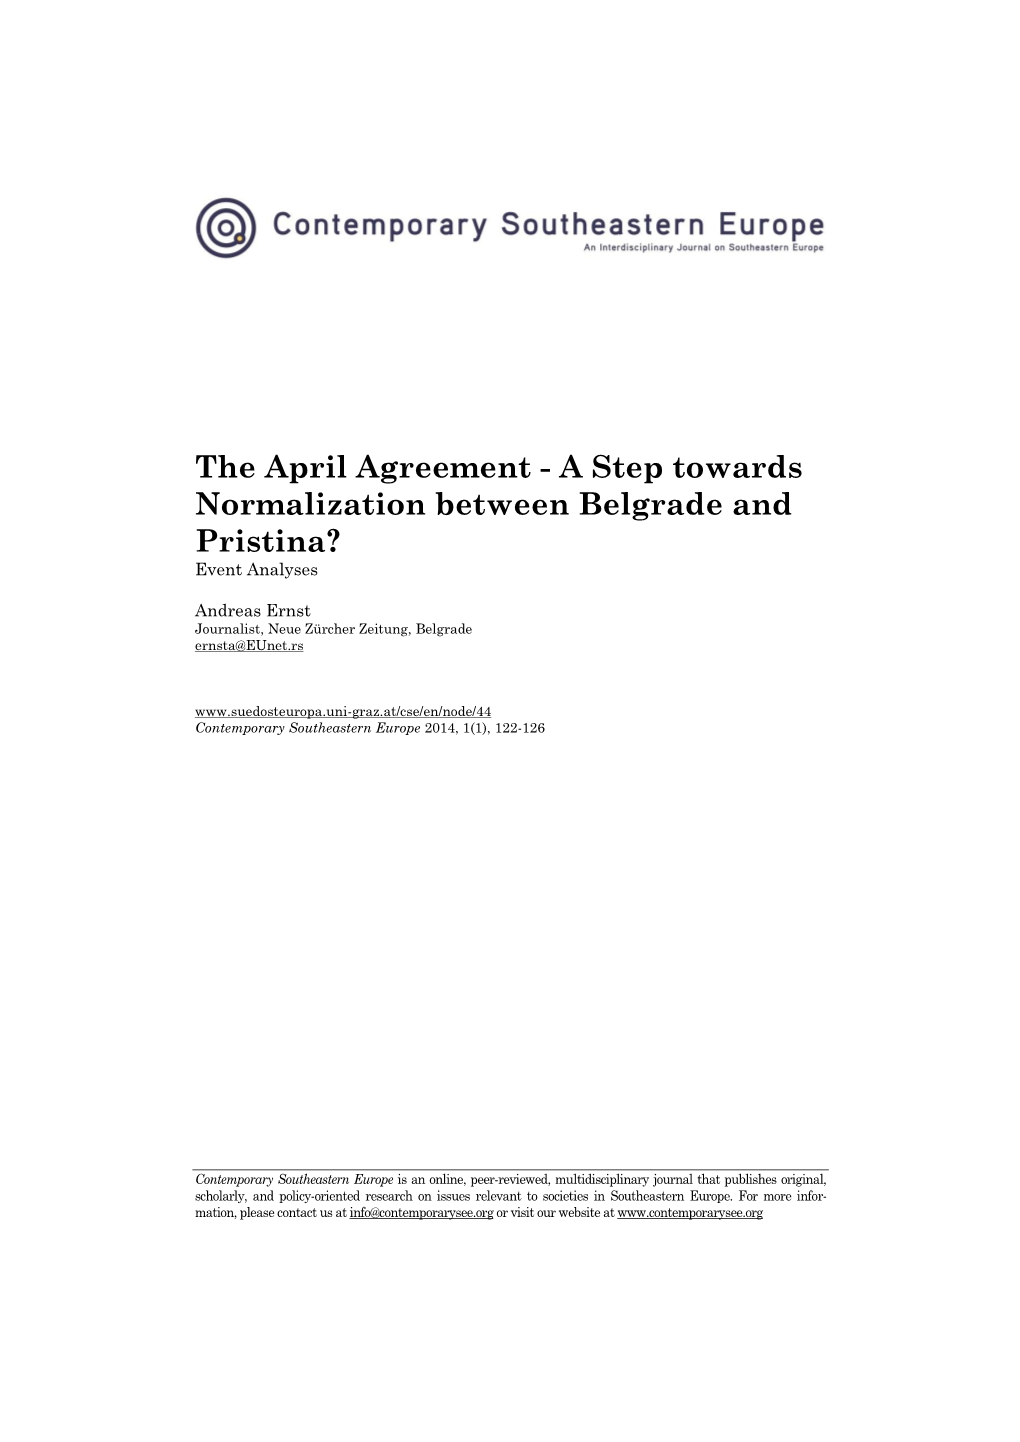 The April Agreement - a Step Towards Normalization Between Belgrade and Pristina? Event Analyses